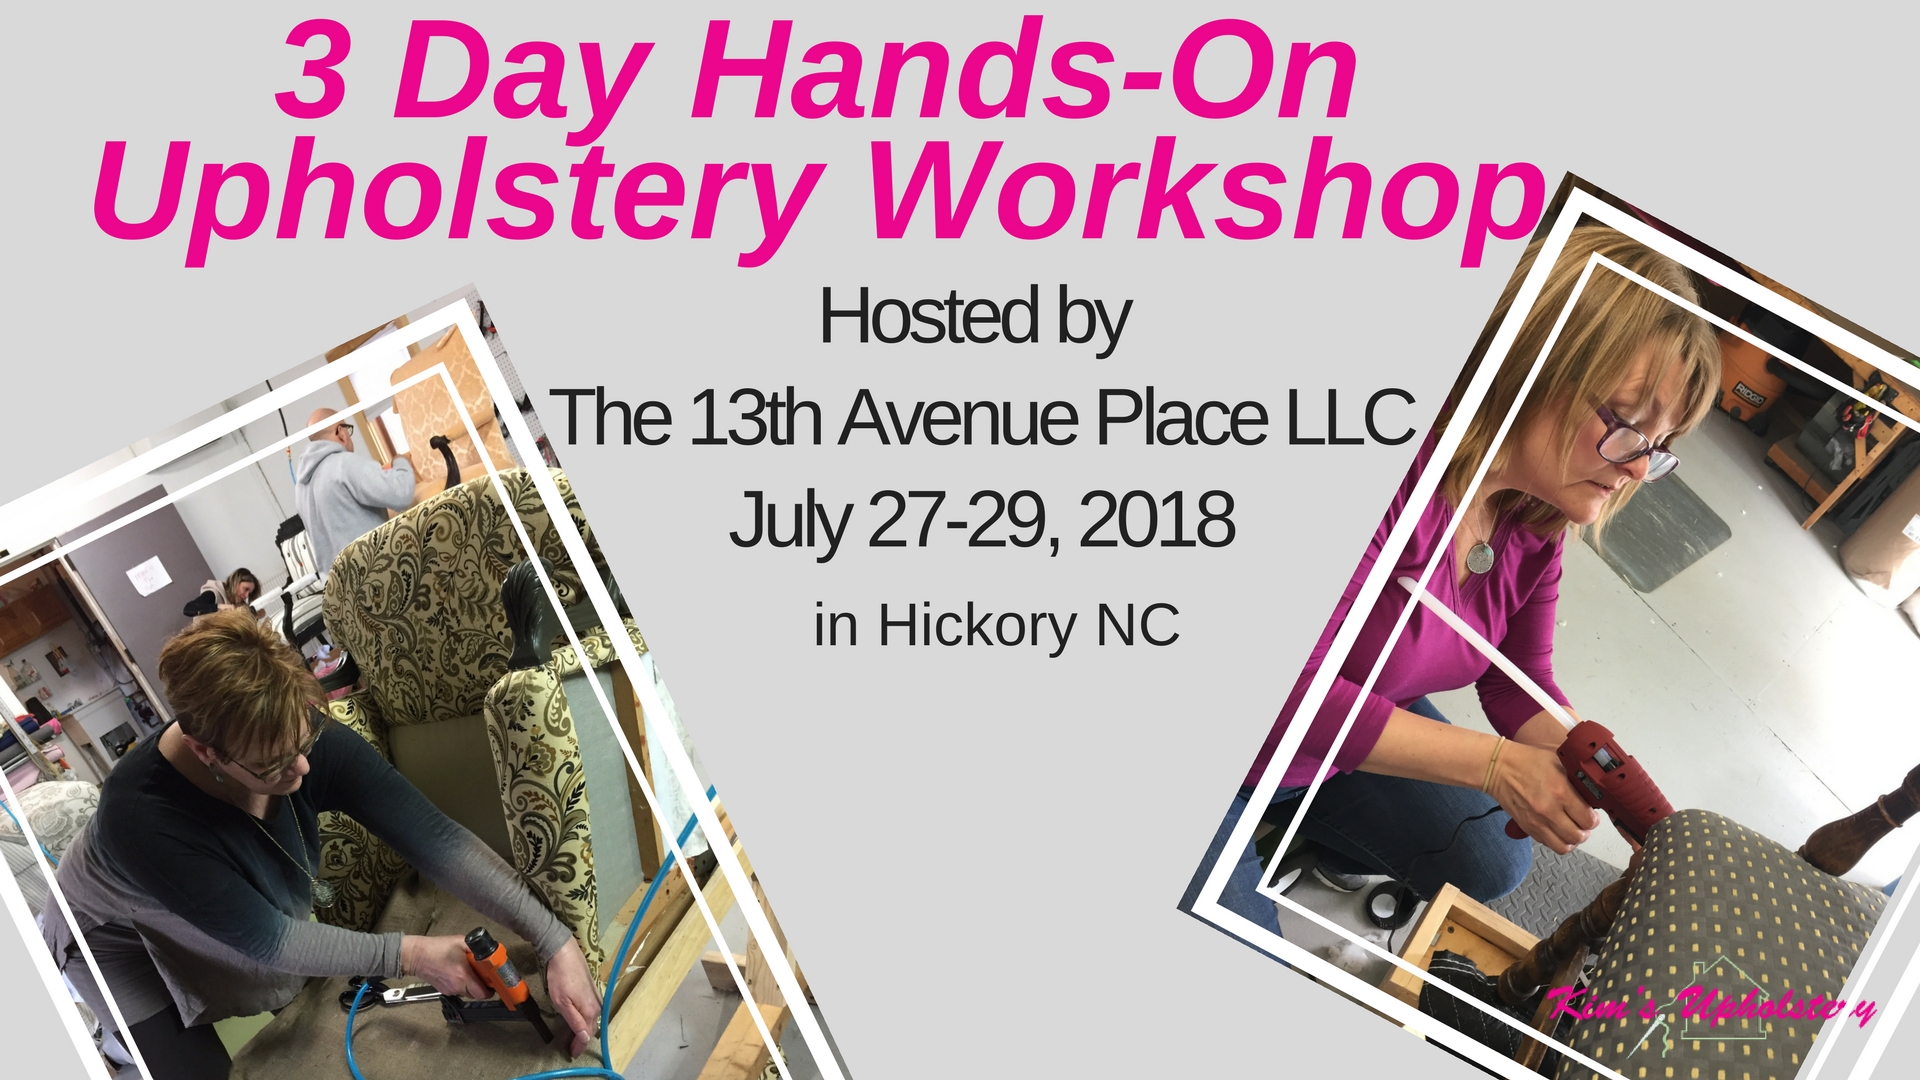 Upholstery Workshop Hickory NC July 27-29, 2018